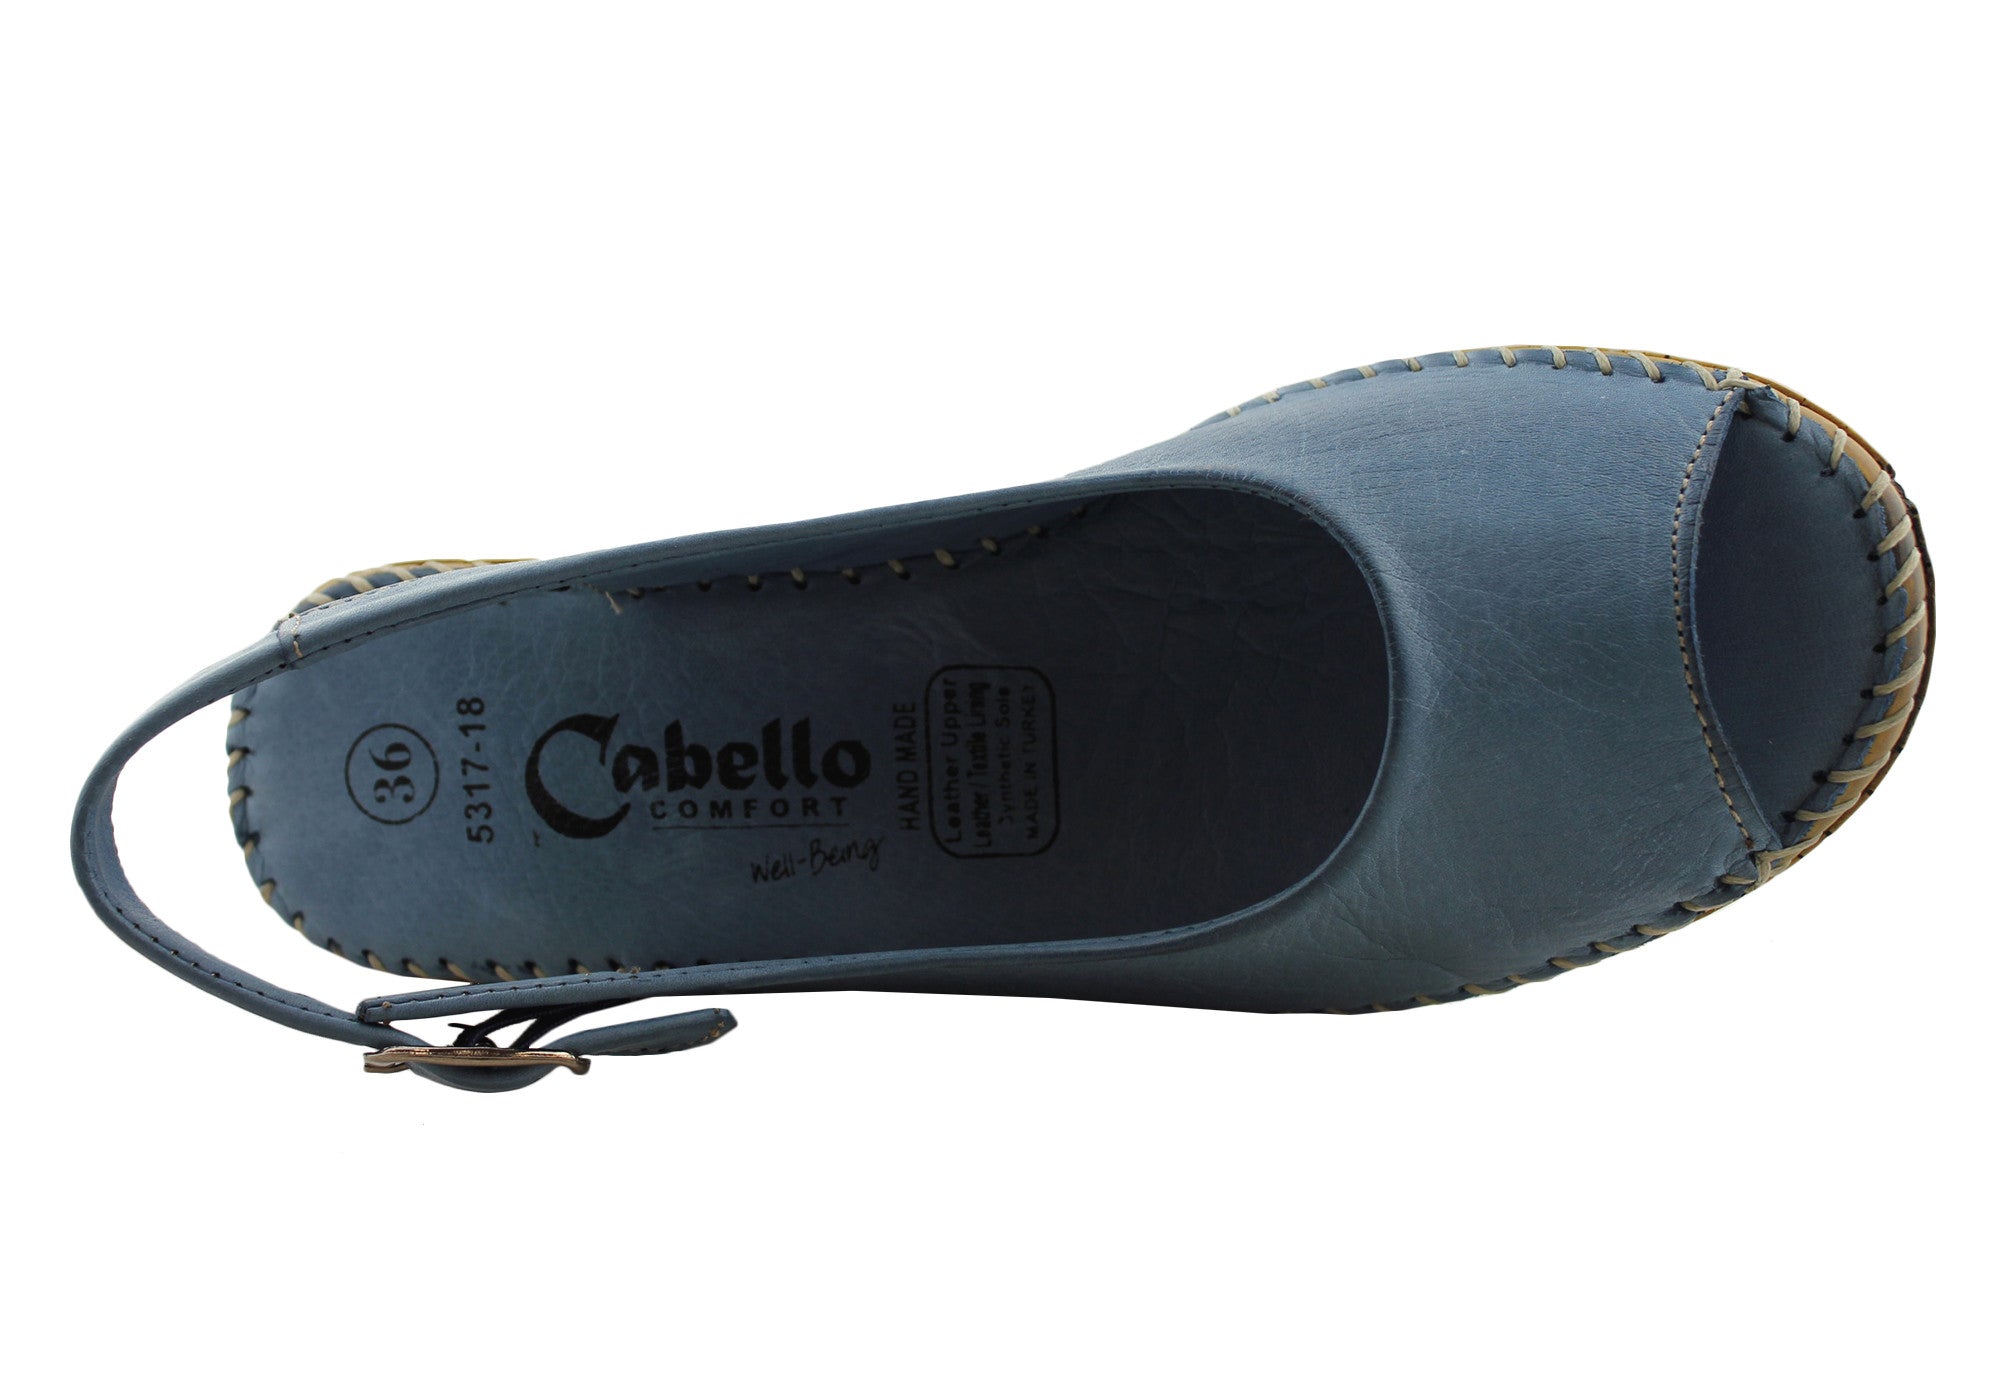 Cabello Comfort 5317-18 Womens Leather Comfort Wedge Sandals